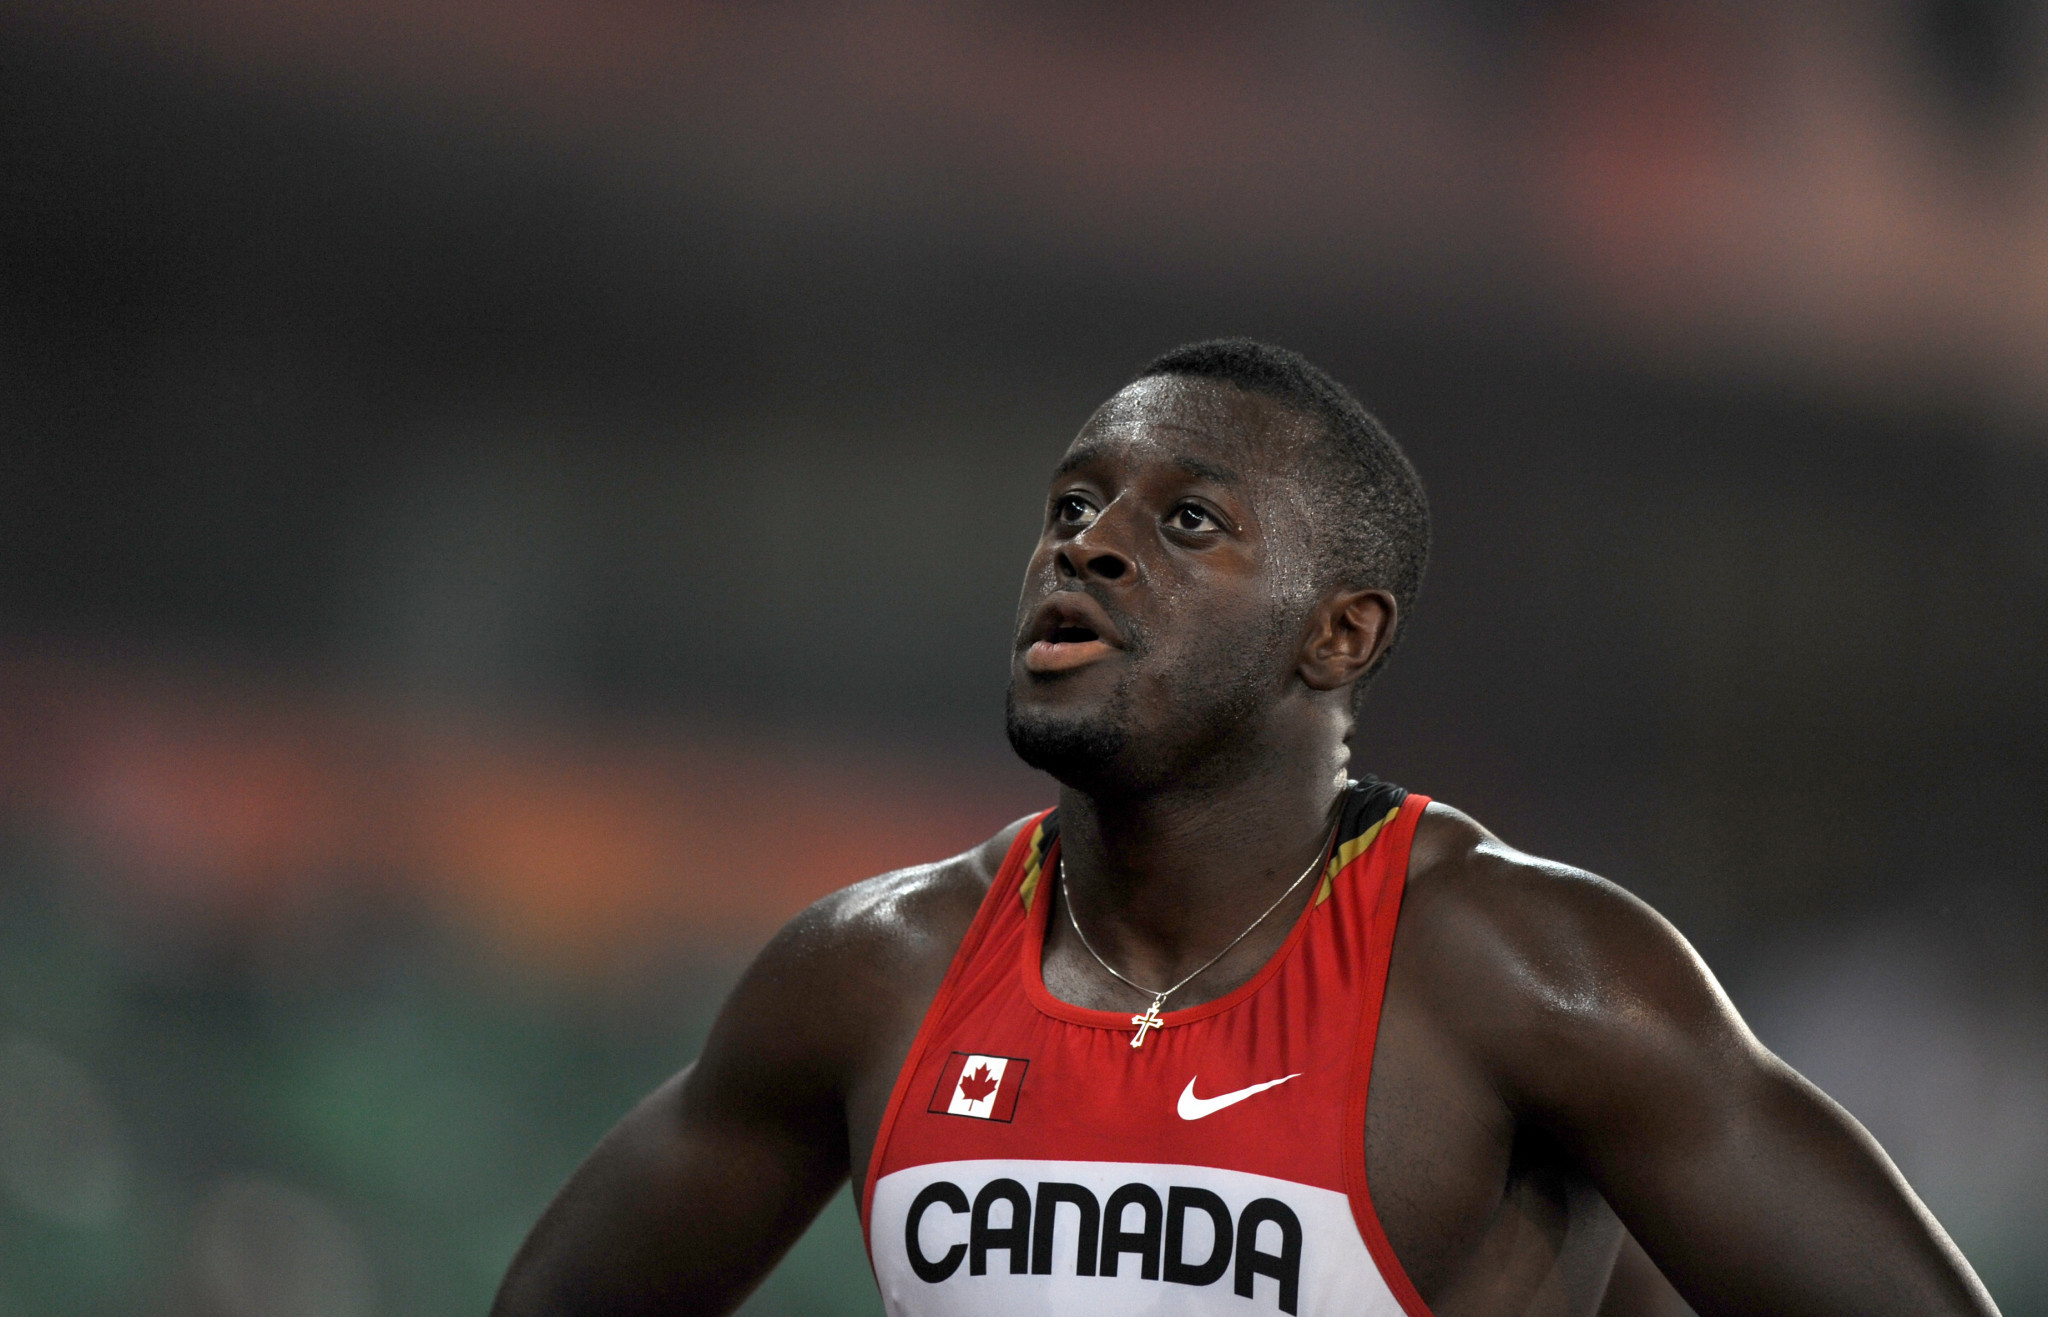 Sam Effah competing at the 2010 Commonwealth Games in Delhi ©Getty Images